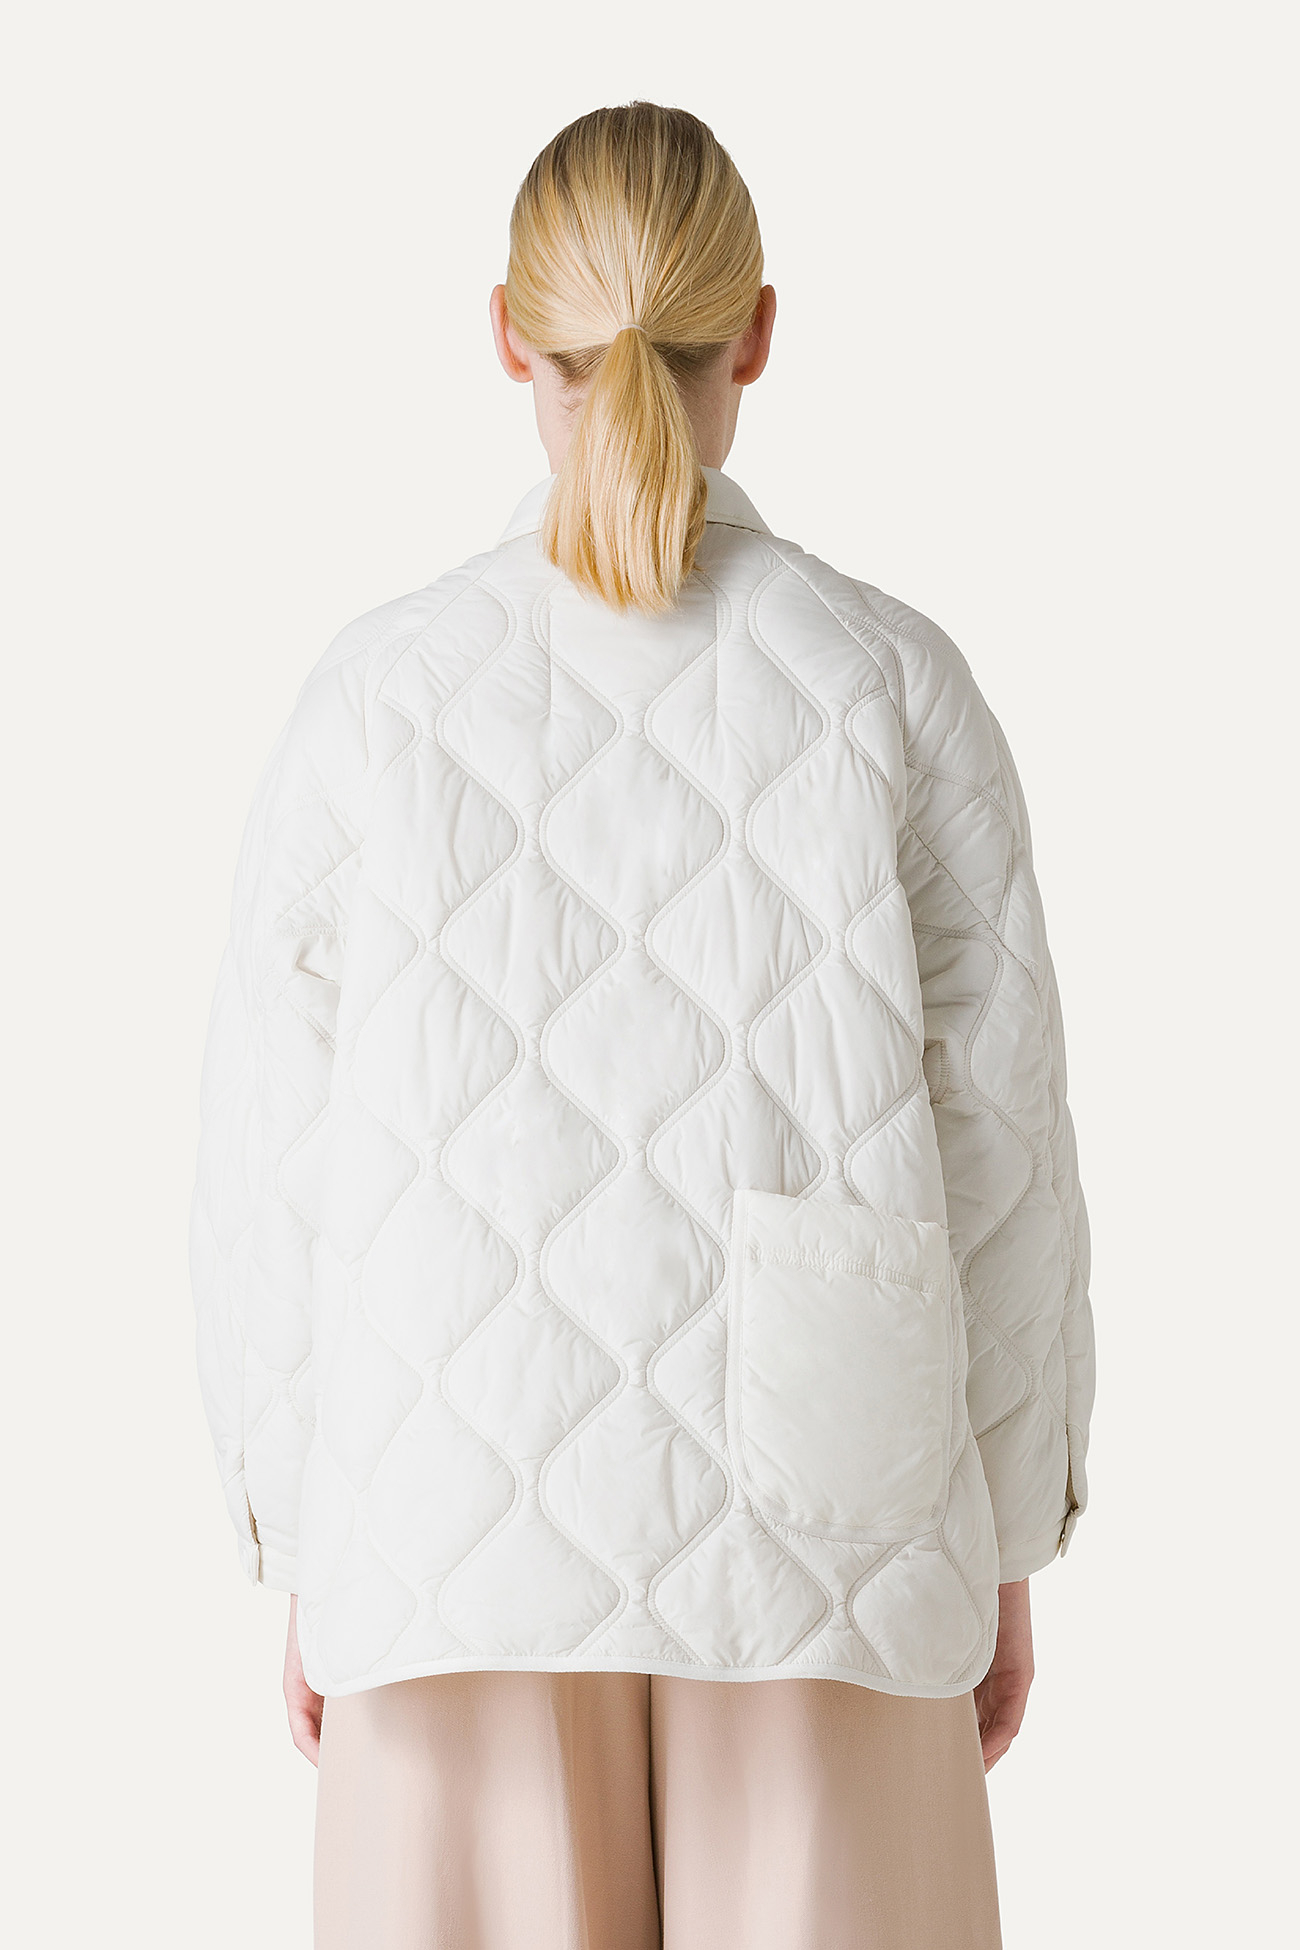 OVERSIZE JACKET IN QUILTED LIGHT NYLON 9222 - BUTTER - OOF WEAR